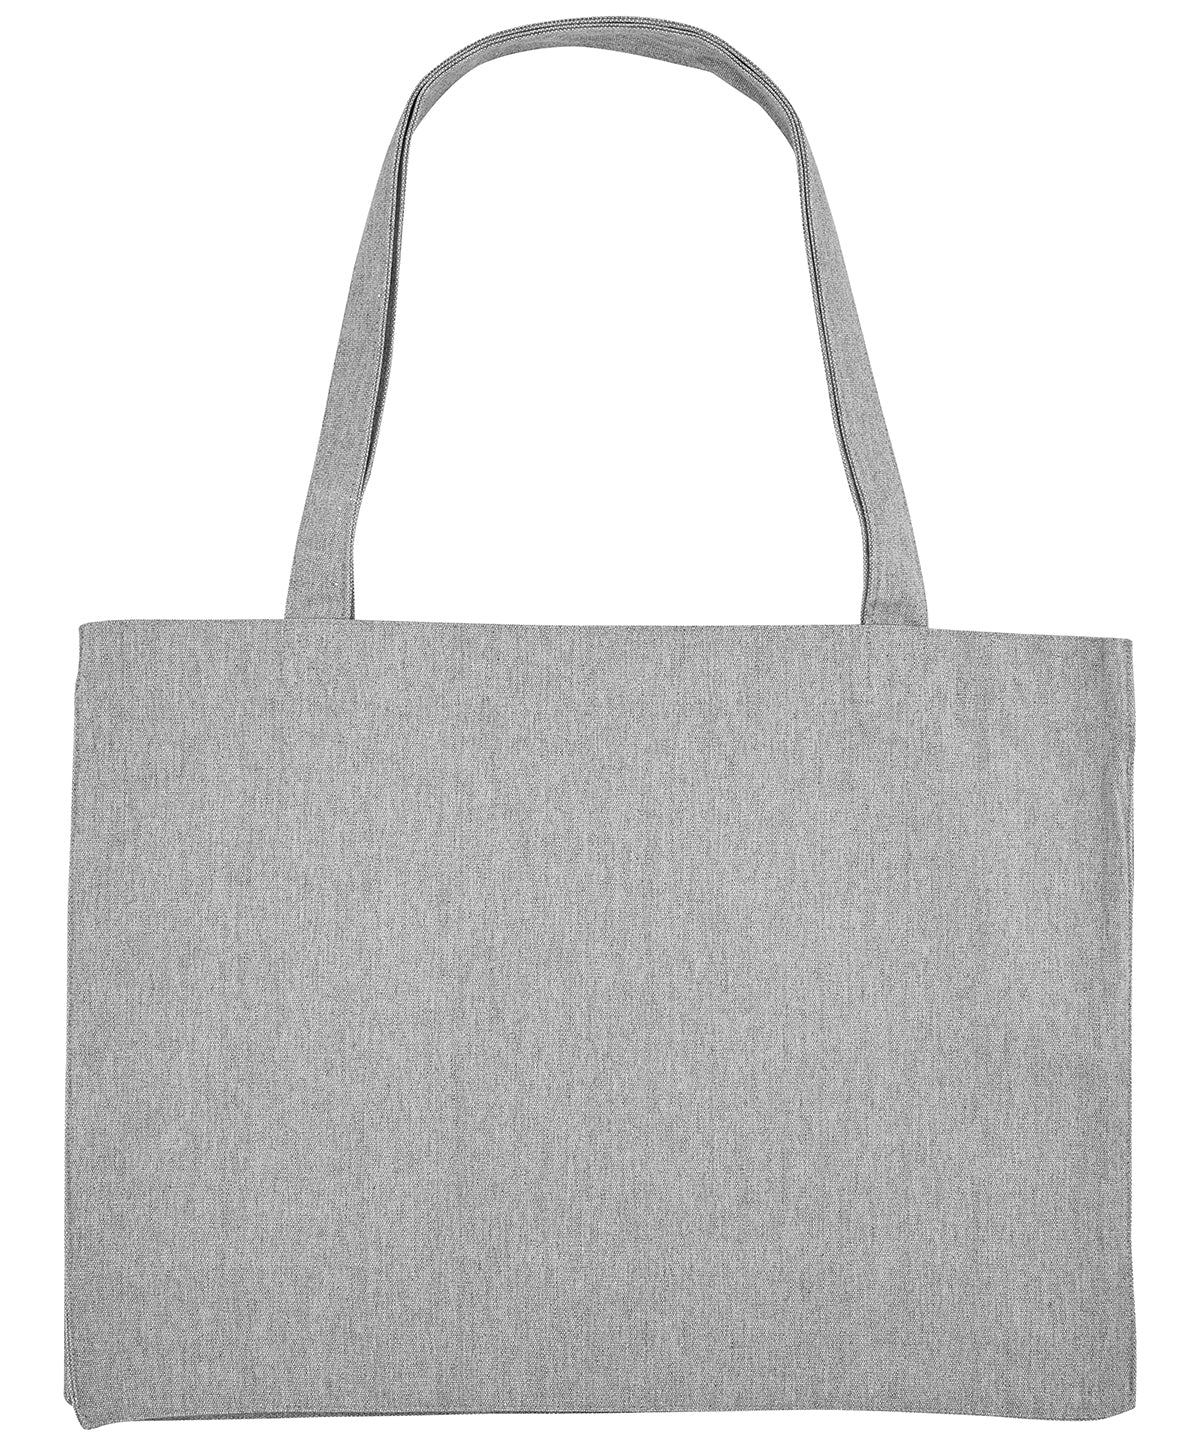 A photo showing the shape of the heather grey organic cotton tote